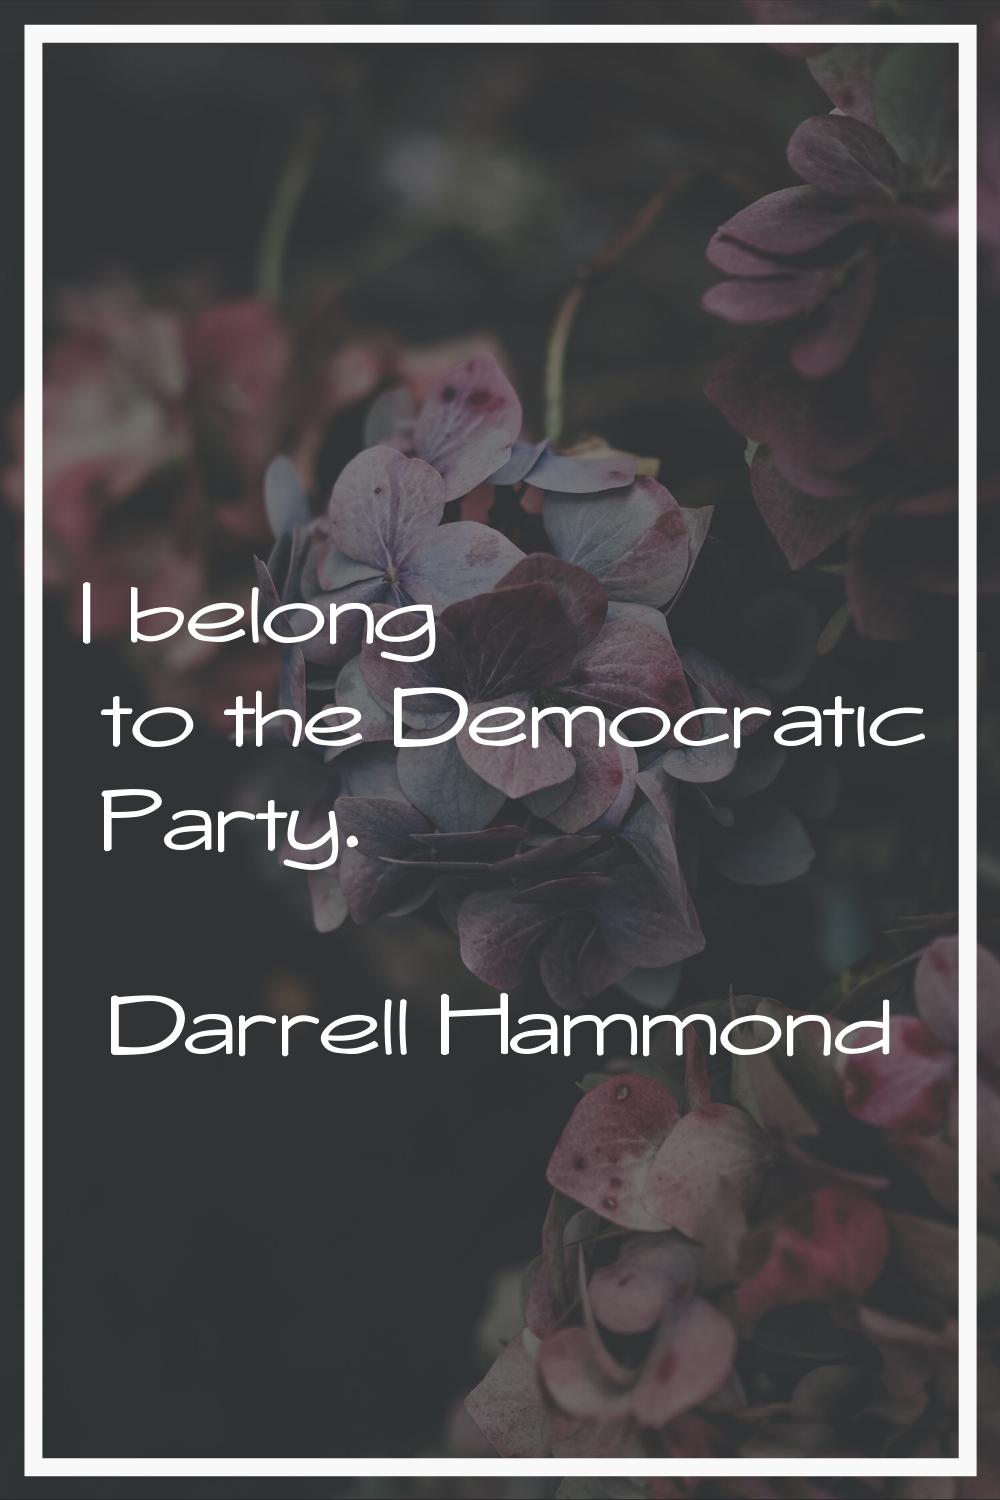 I belong to the Democratic Party.